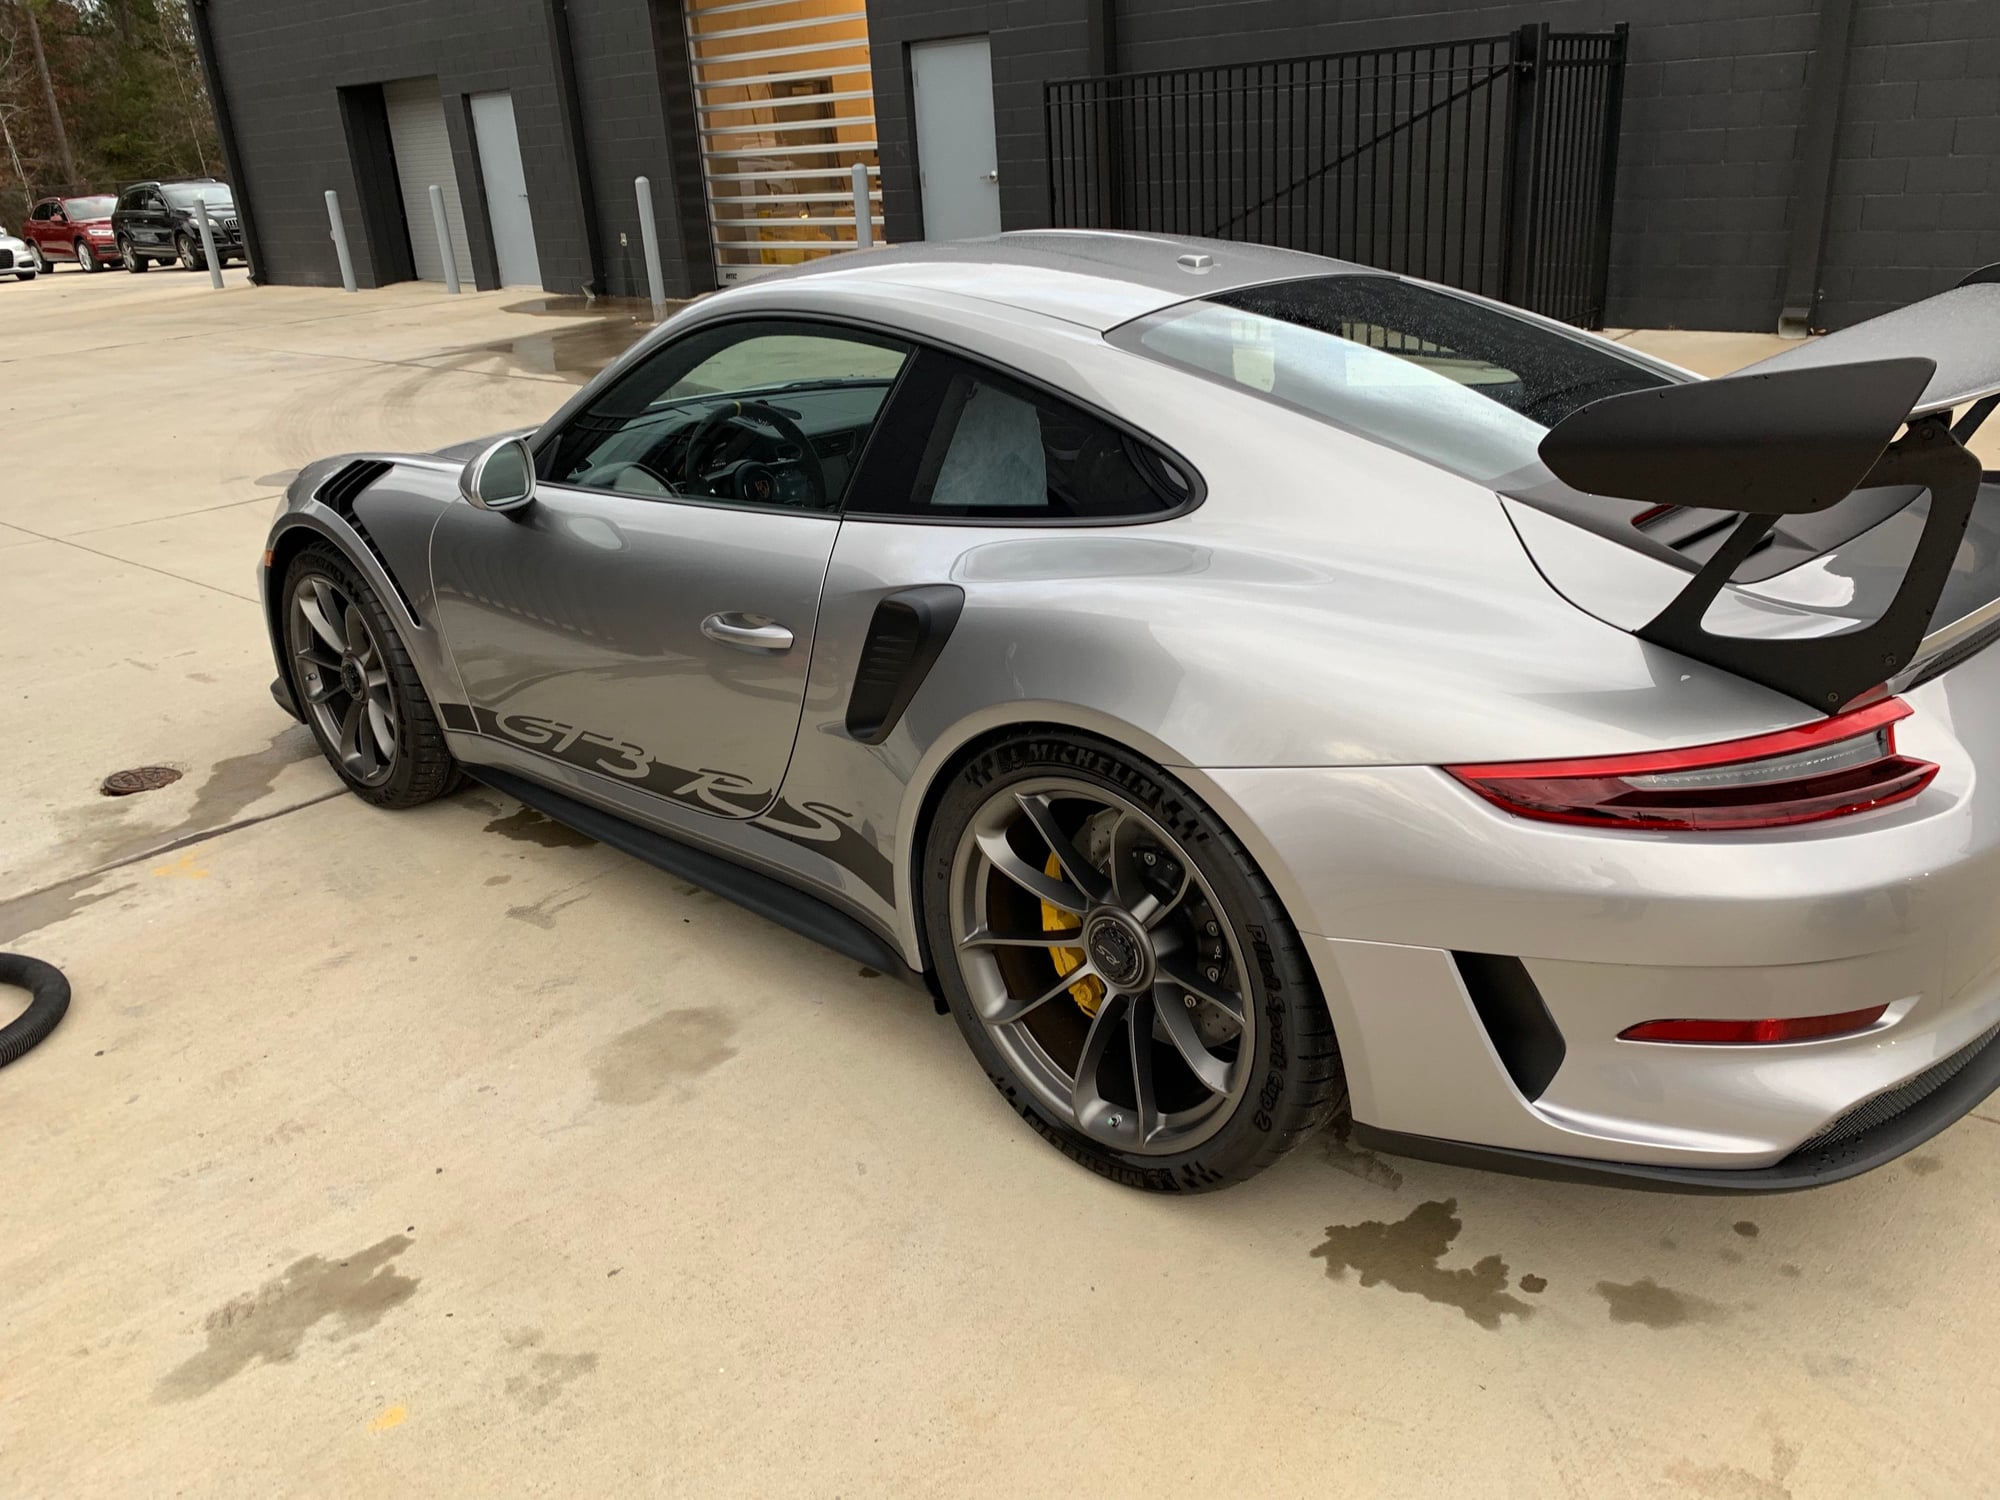 2019 Porsche GT3 - 2019 GT3RS - Used - VIN WP0AF2A93KS164944 - 906 Miles - 6 cyl - 2WD - Automatic - Coupe - Silver - Shreveport, LA 71106, United States